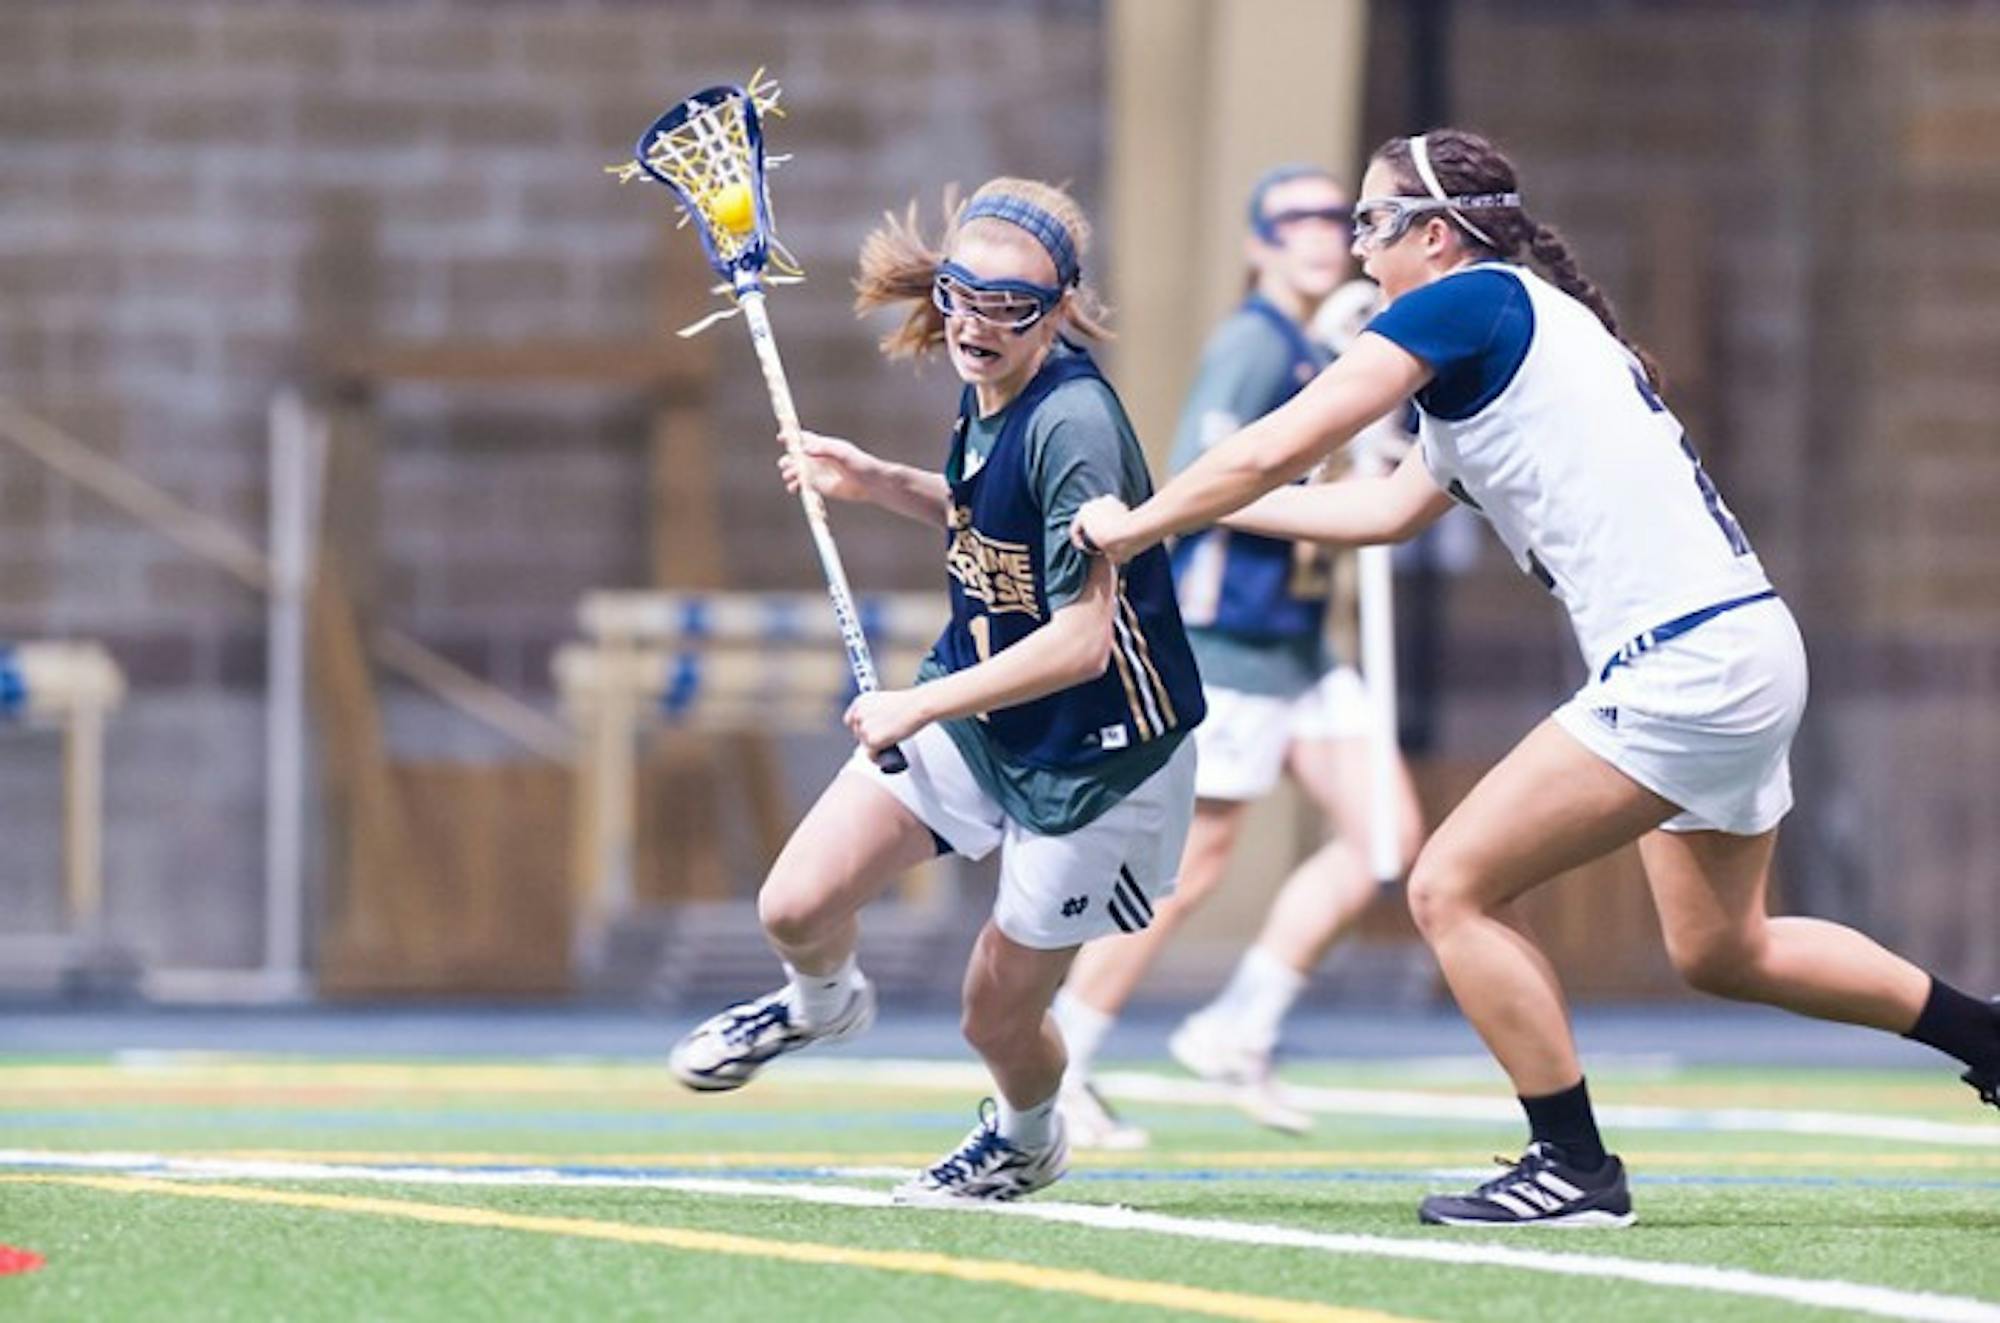 Sophomore attack Kiera McMullan tries to power past a Michigan defender during Notre Dame’s 19-7 exhibition victory over the Wolverines on Feb. 8 at the Loftus Sports Center.